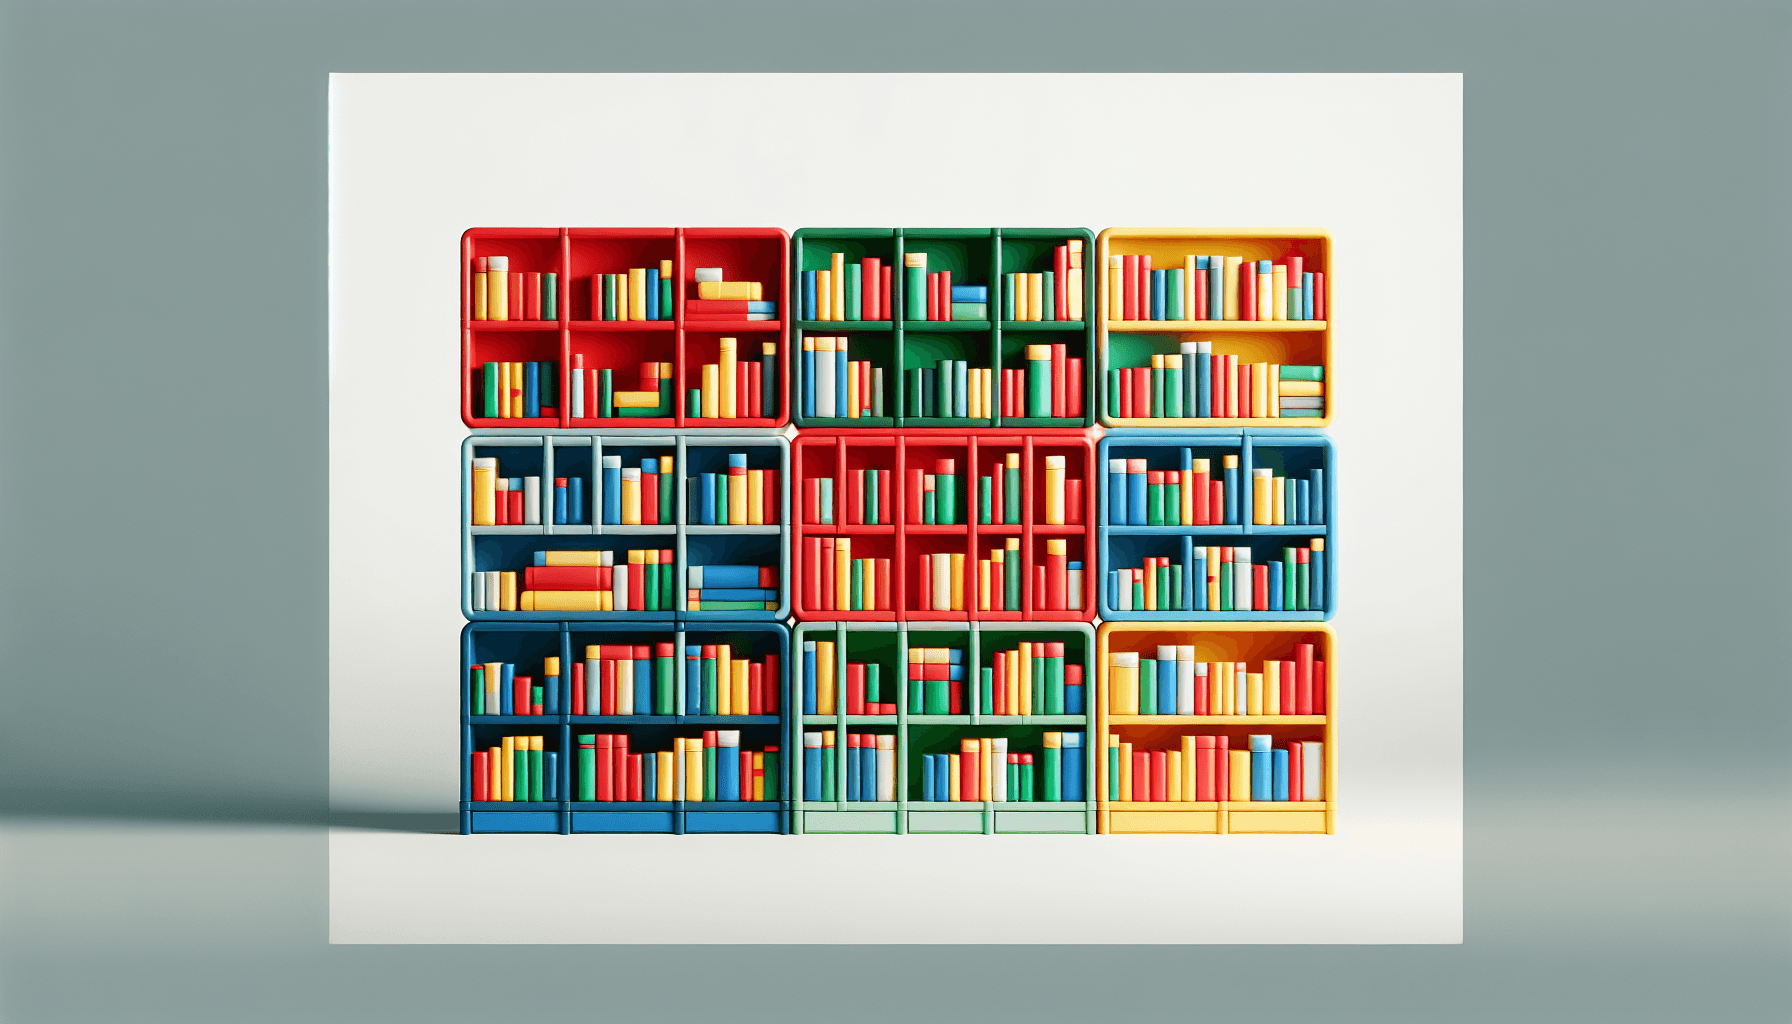 Library Shelving in flat illustration style and white background, red #f47574, green #88c7a8, yellow #fcc44b, and blue #645bc8 colors.